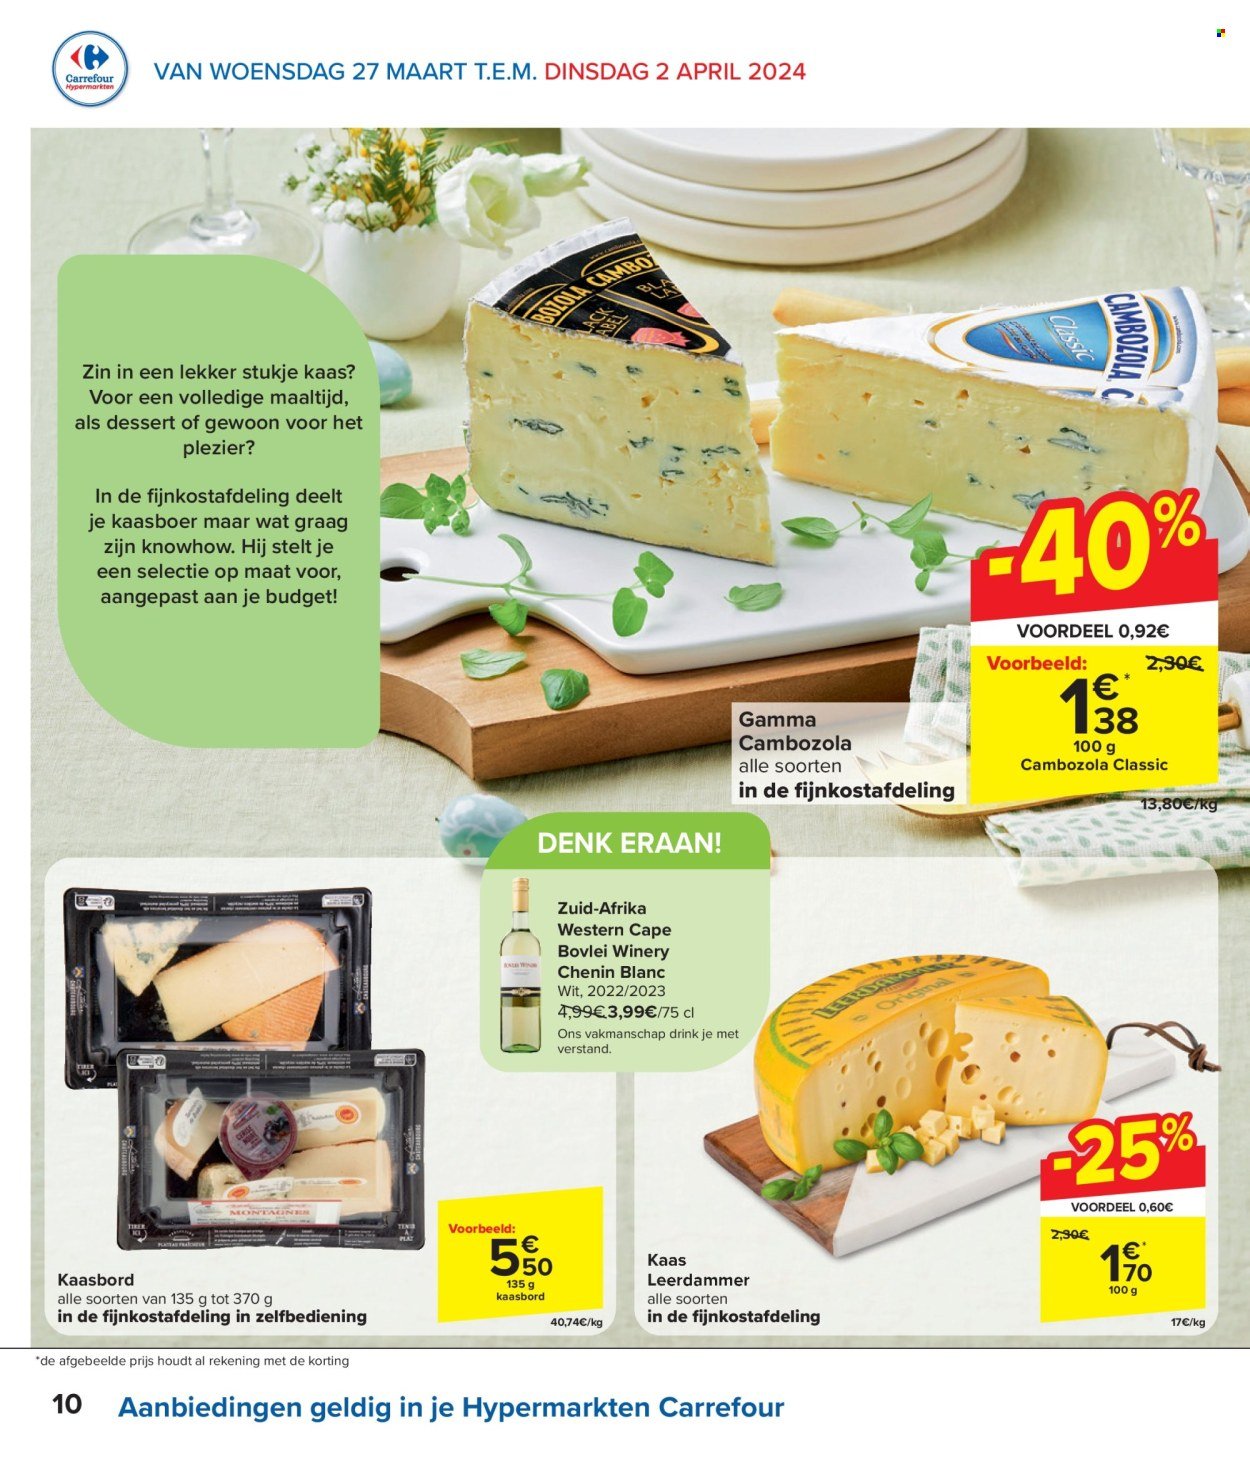 Catalogue Carrefour hypermarkt - 27.3.2024 - 8.4.2024. Page 10.